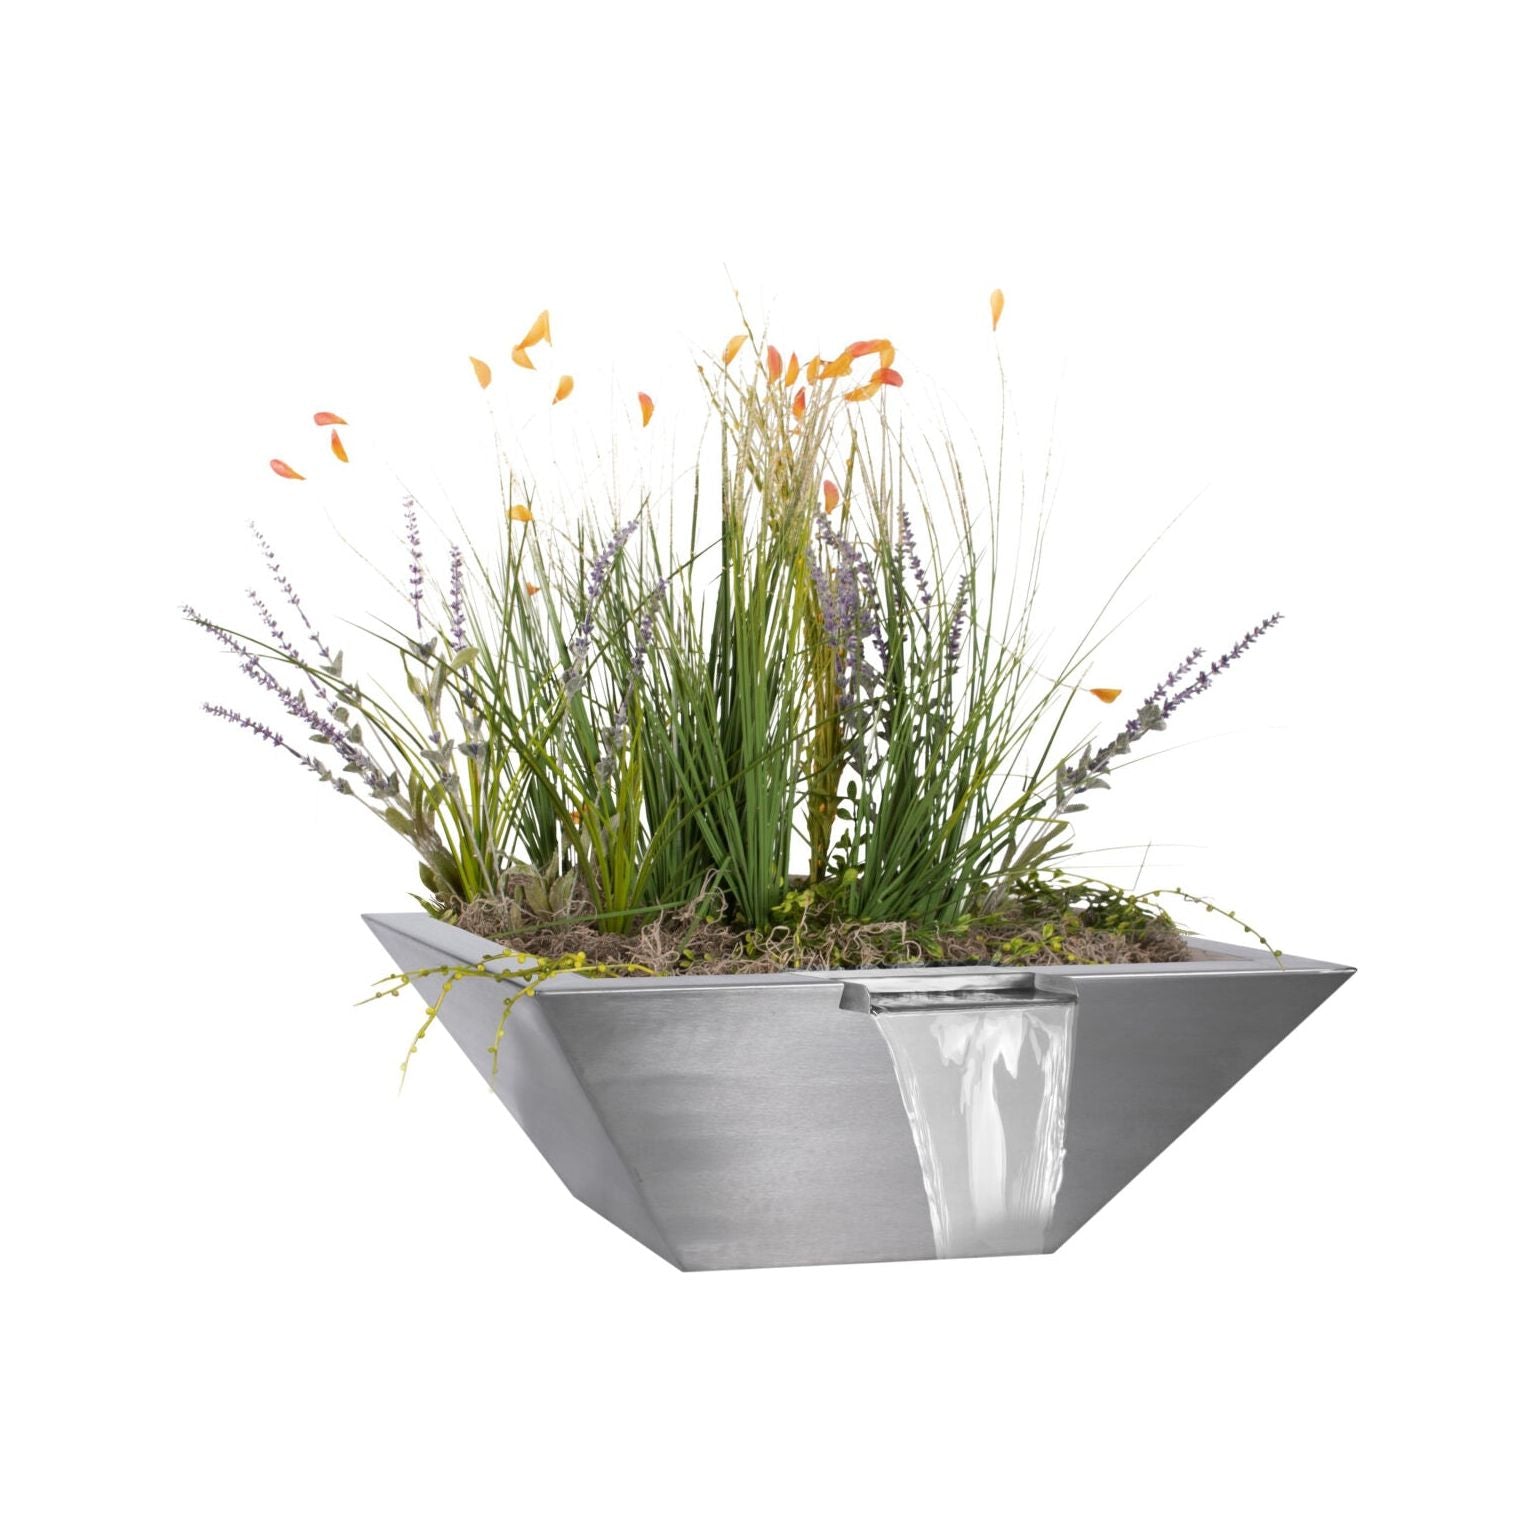 The Outdoor Plus Maya Planter & Water Bowl Stainless Steel OPT-XXSQSSPW - Serenity Provision